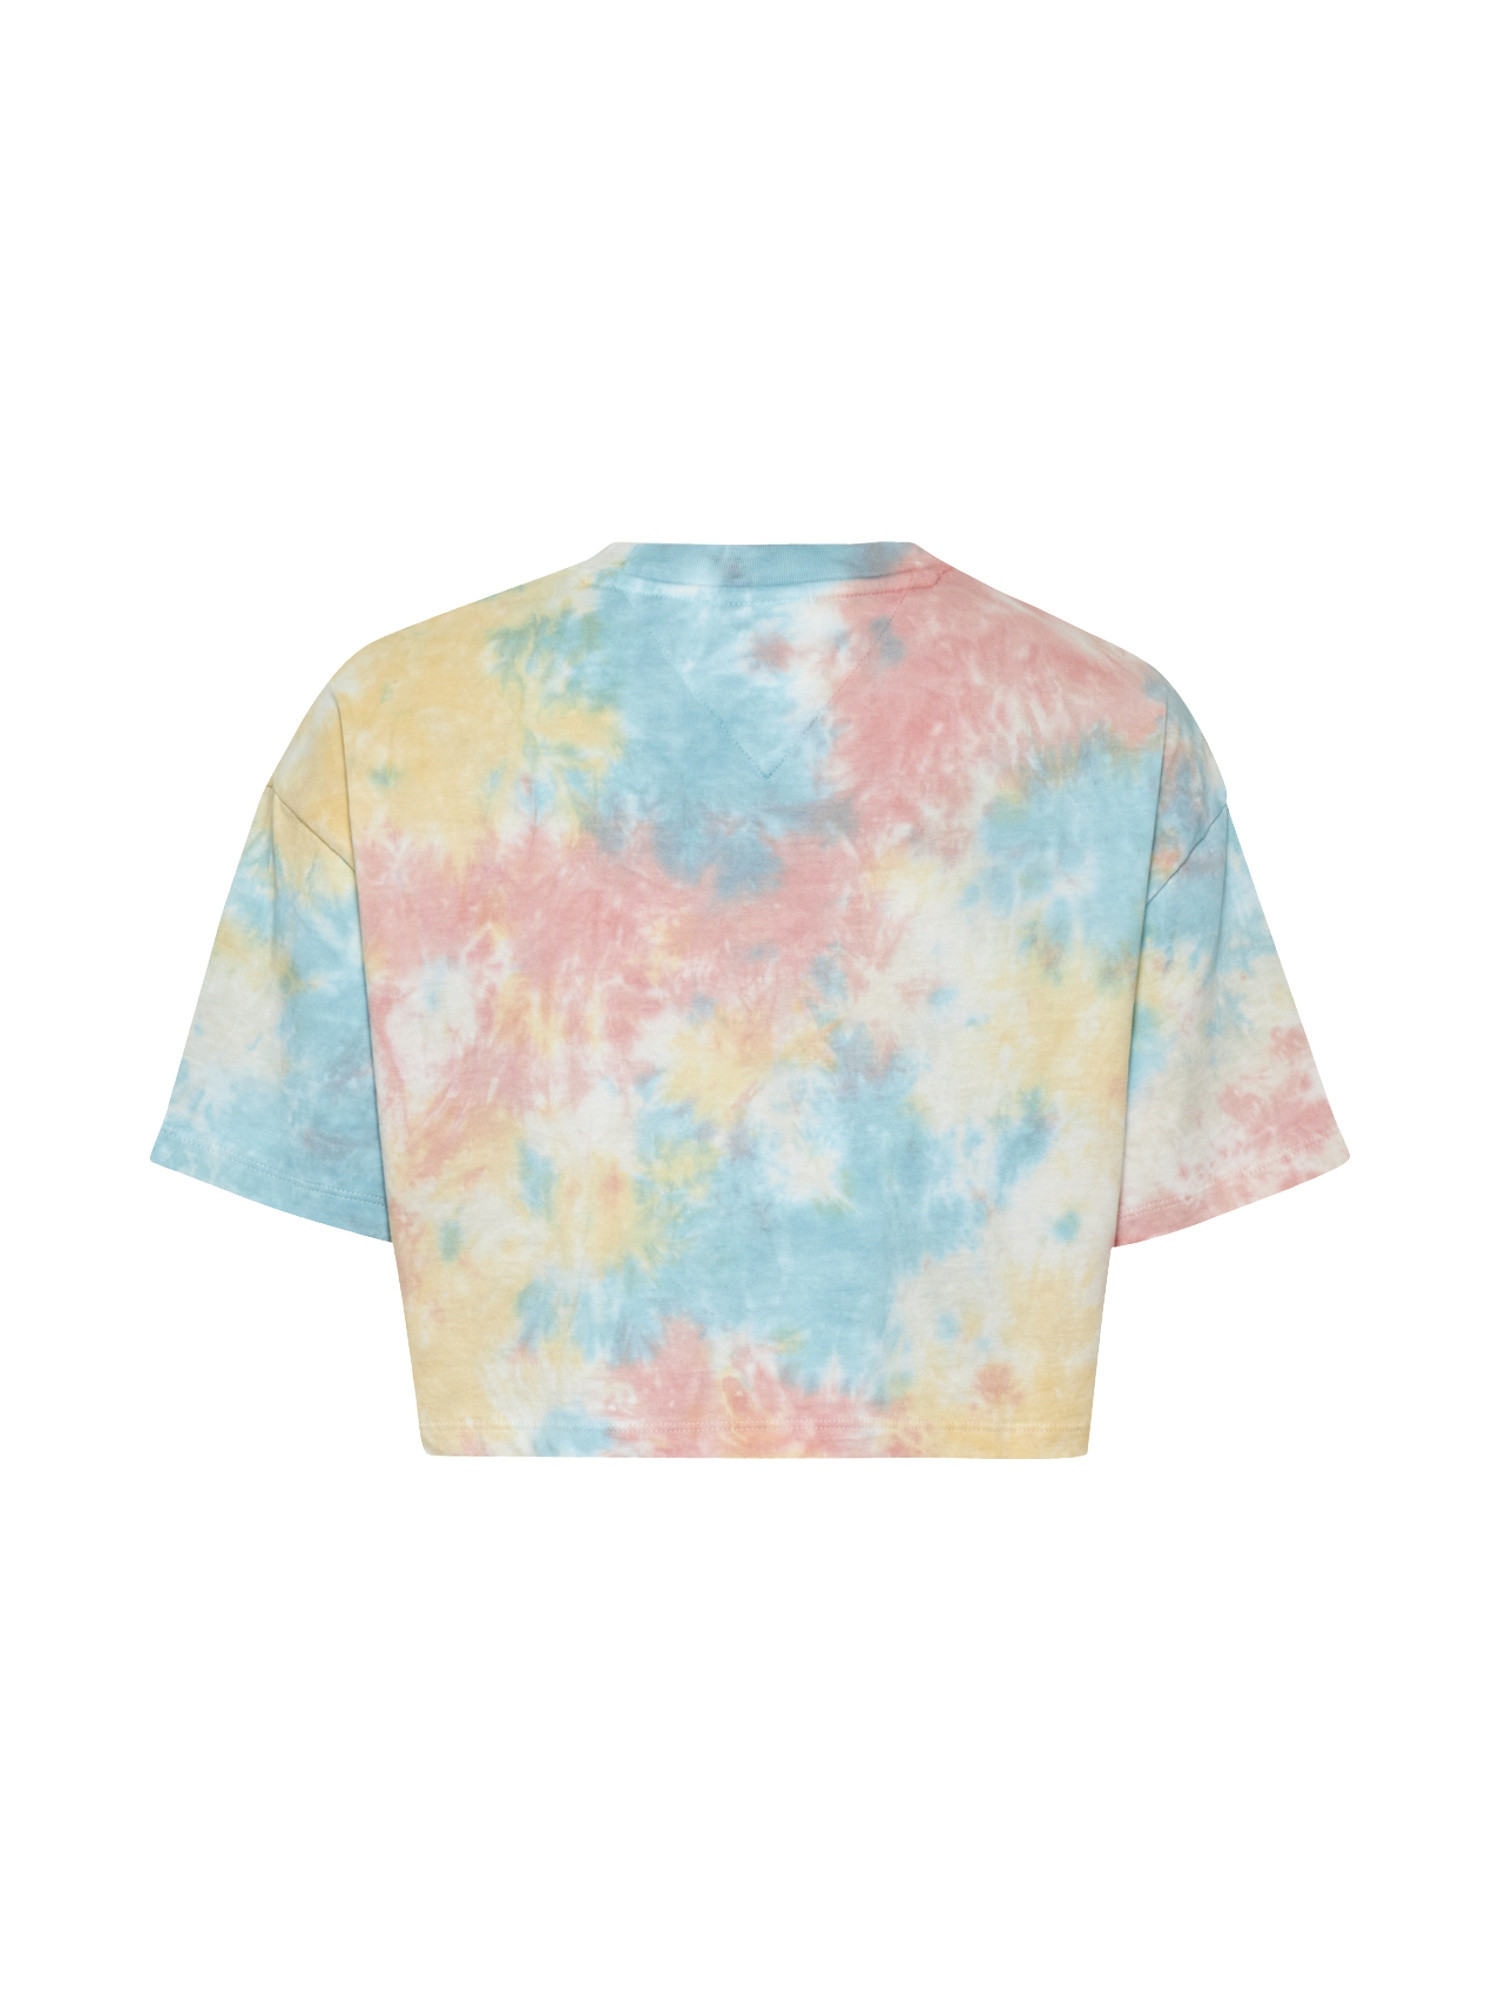 T-shirt cropped tie dye, Multicolor, large image number 1